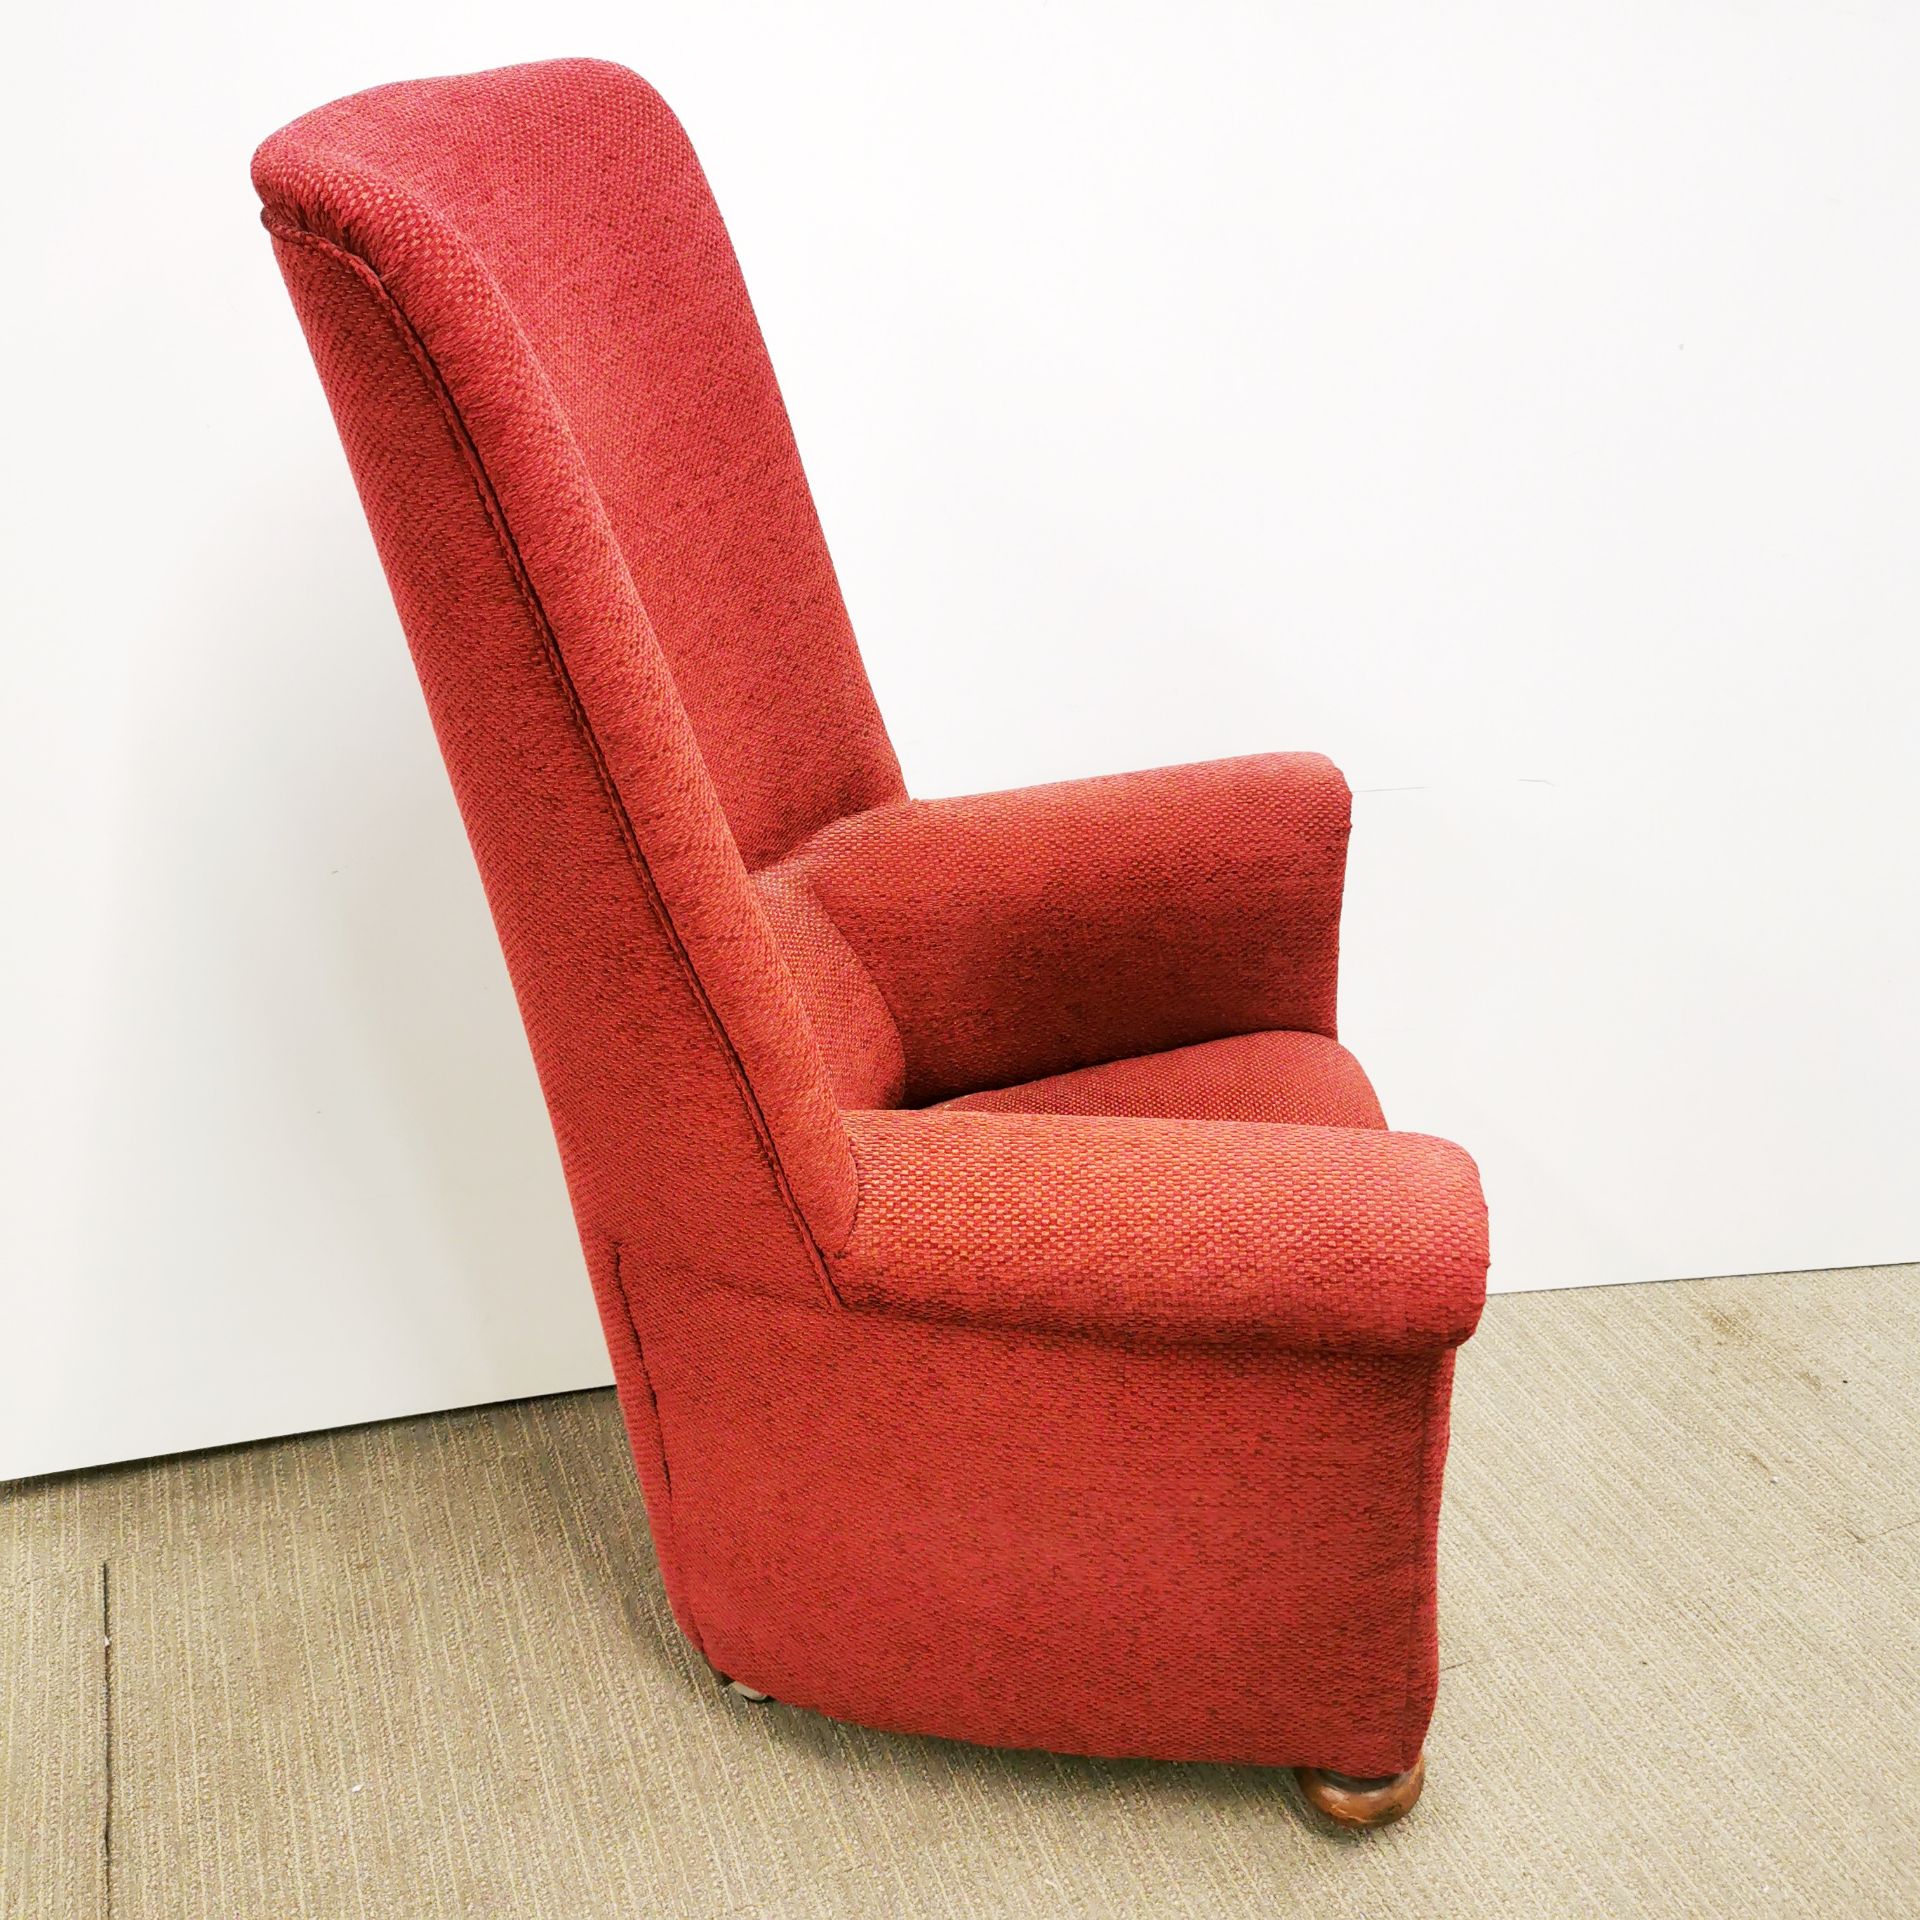 A red upholstered high back armchair. - Image 2 of 2